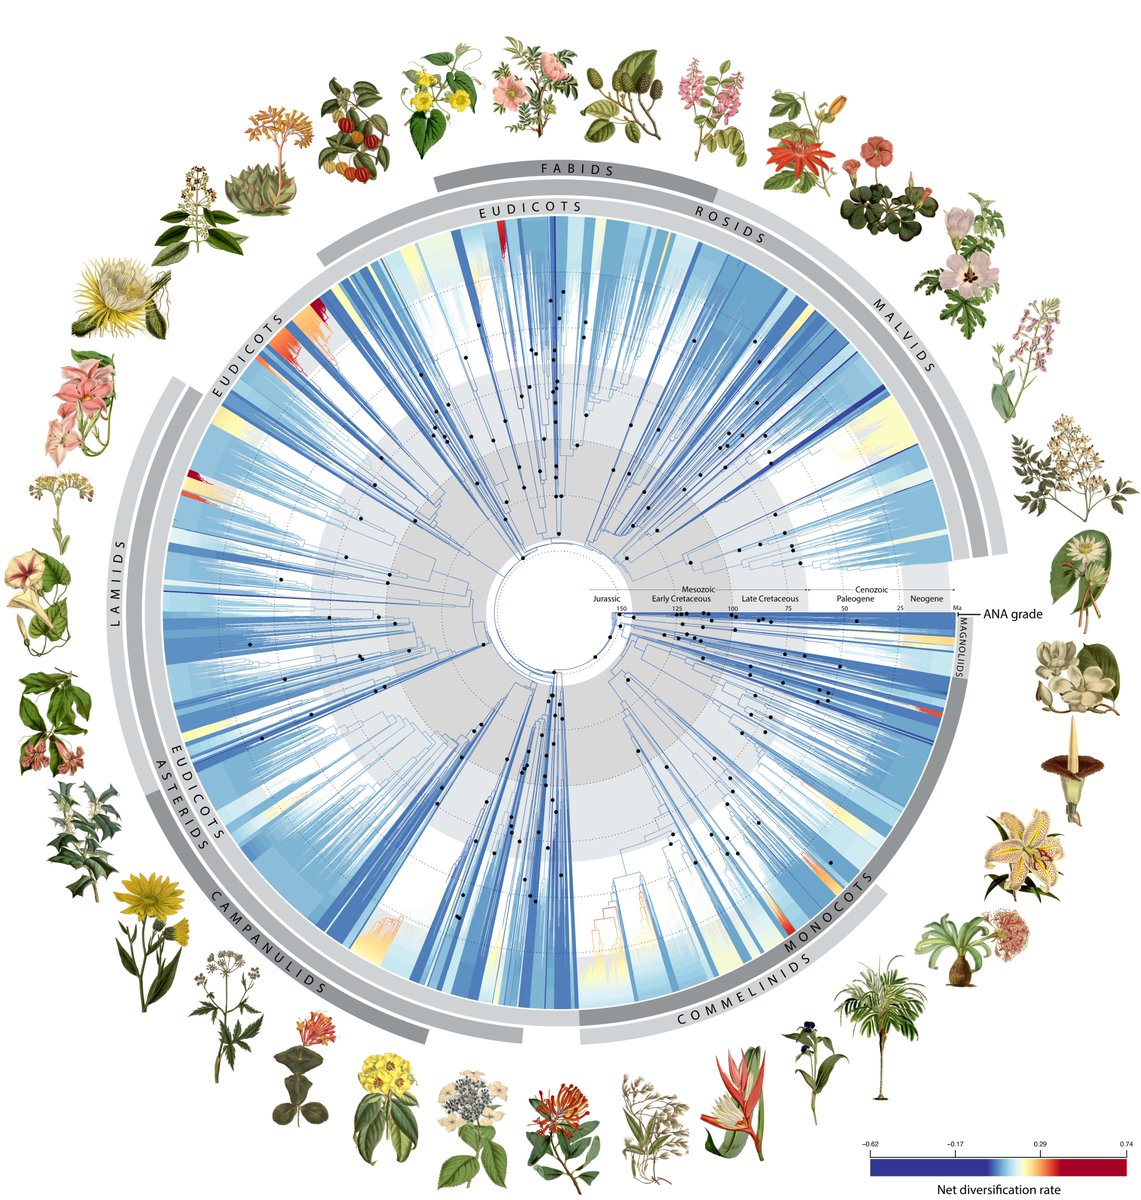 In a new paper out today, nearly 300 researchers, including NMNH's Robert Soreng, have crafted an invaluable tool - a vast DNA tree of life with 1.8 billion letters of genetic code from 9,500+ species! 🧬

Read more about this open access resource here: s.si.edu/4b9Z18e